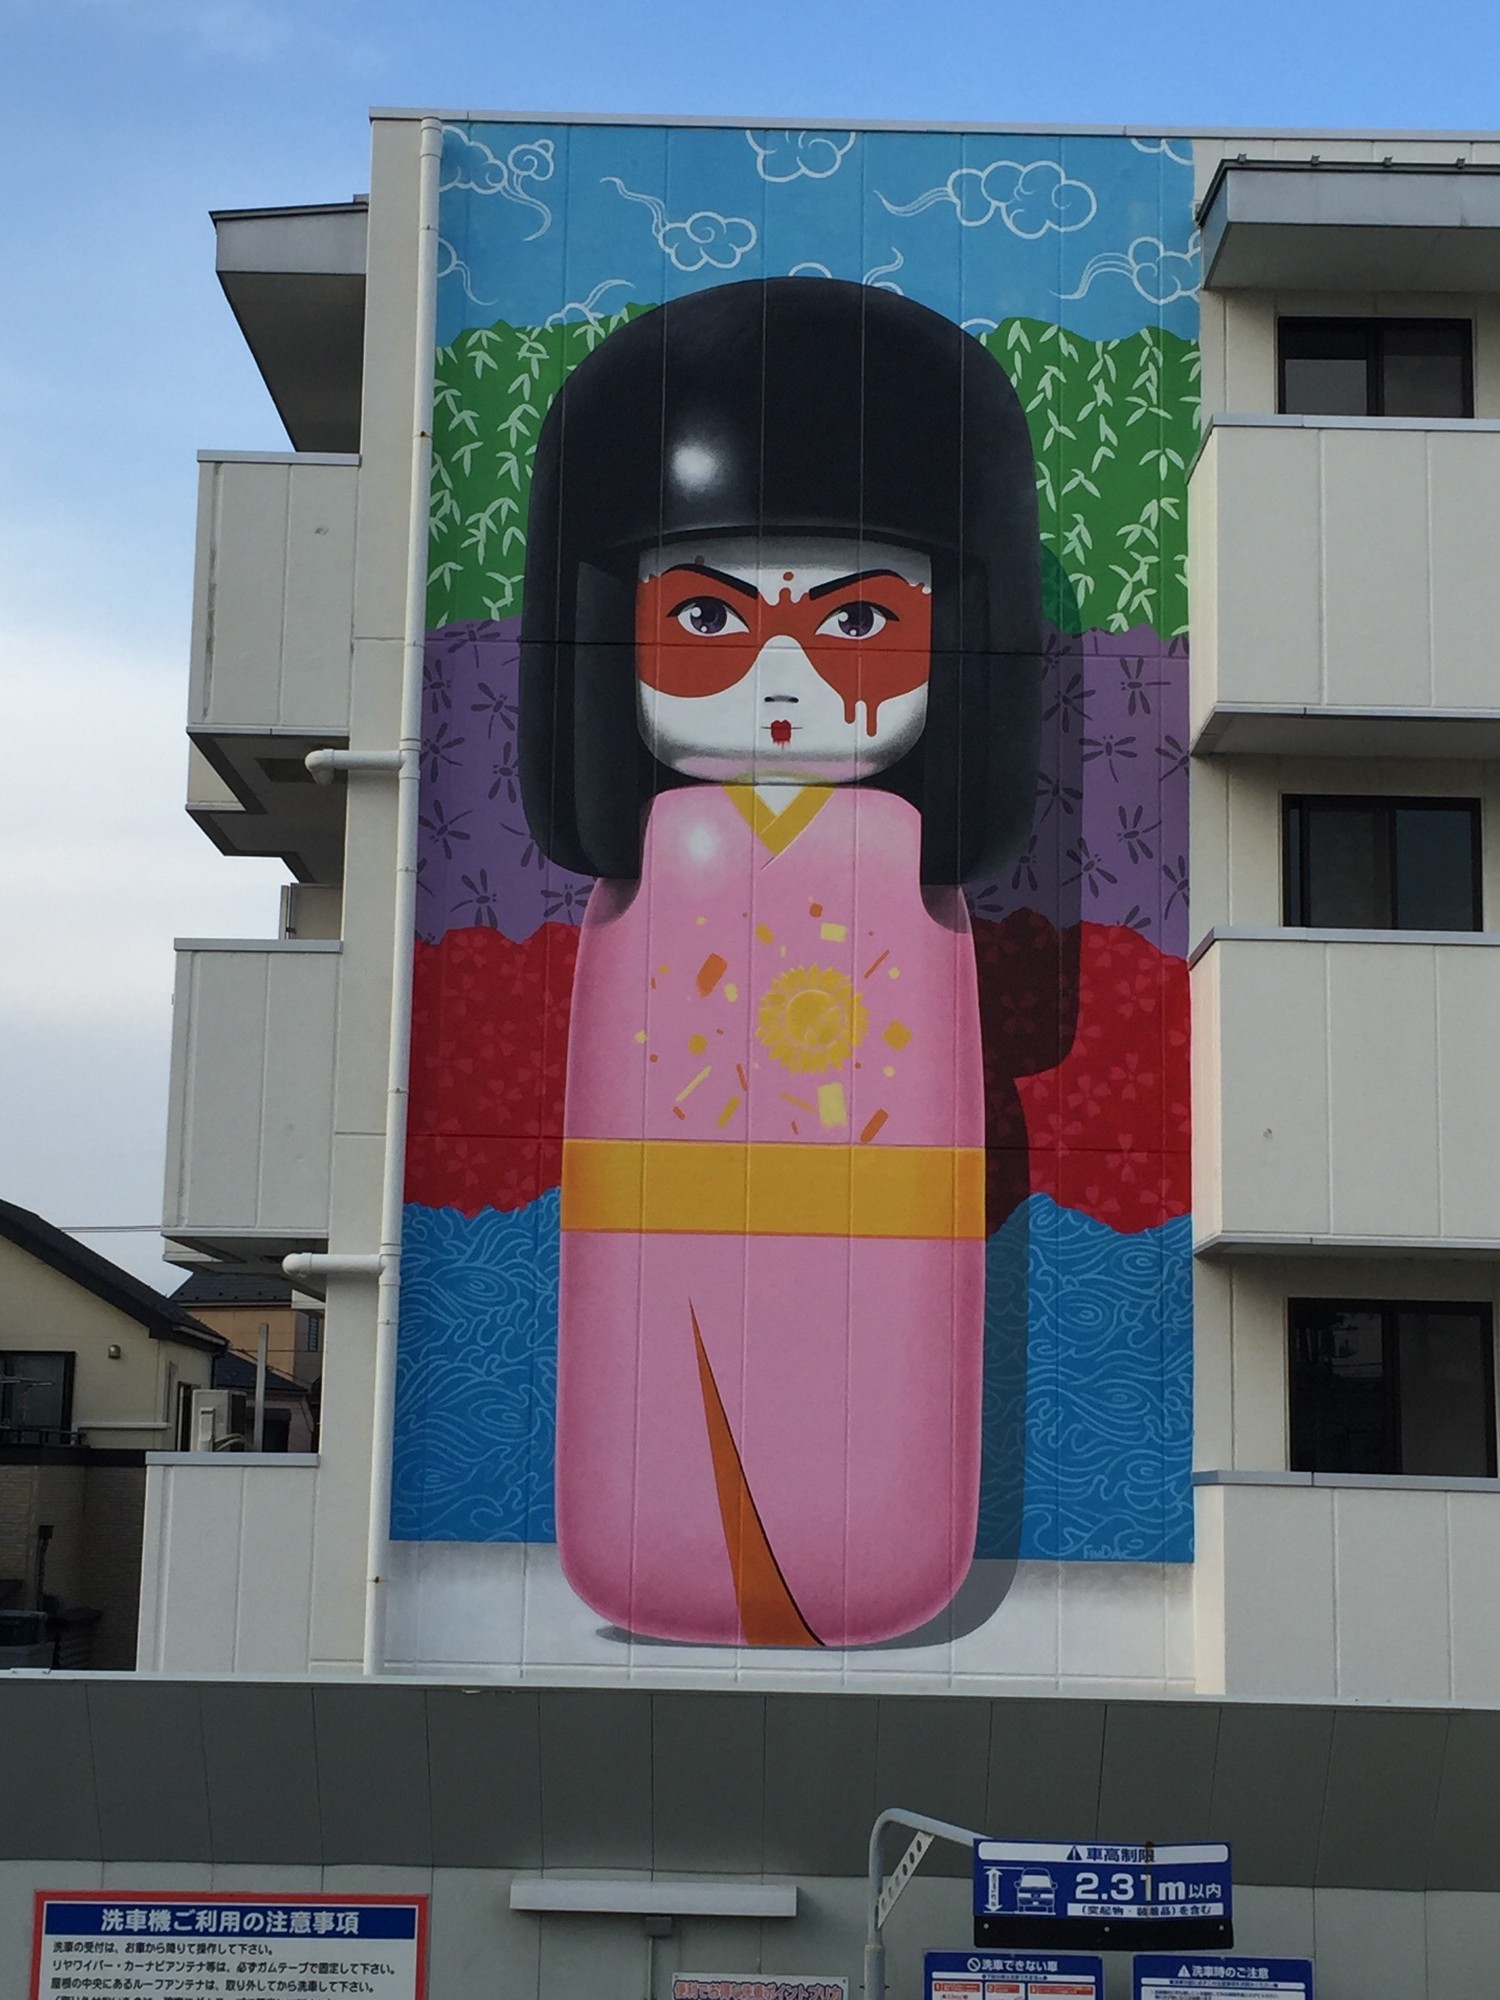 KOKESHI DOLL BRINGS COLOR TO TOKYO DISTRICT - the vandallist (3)